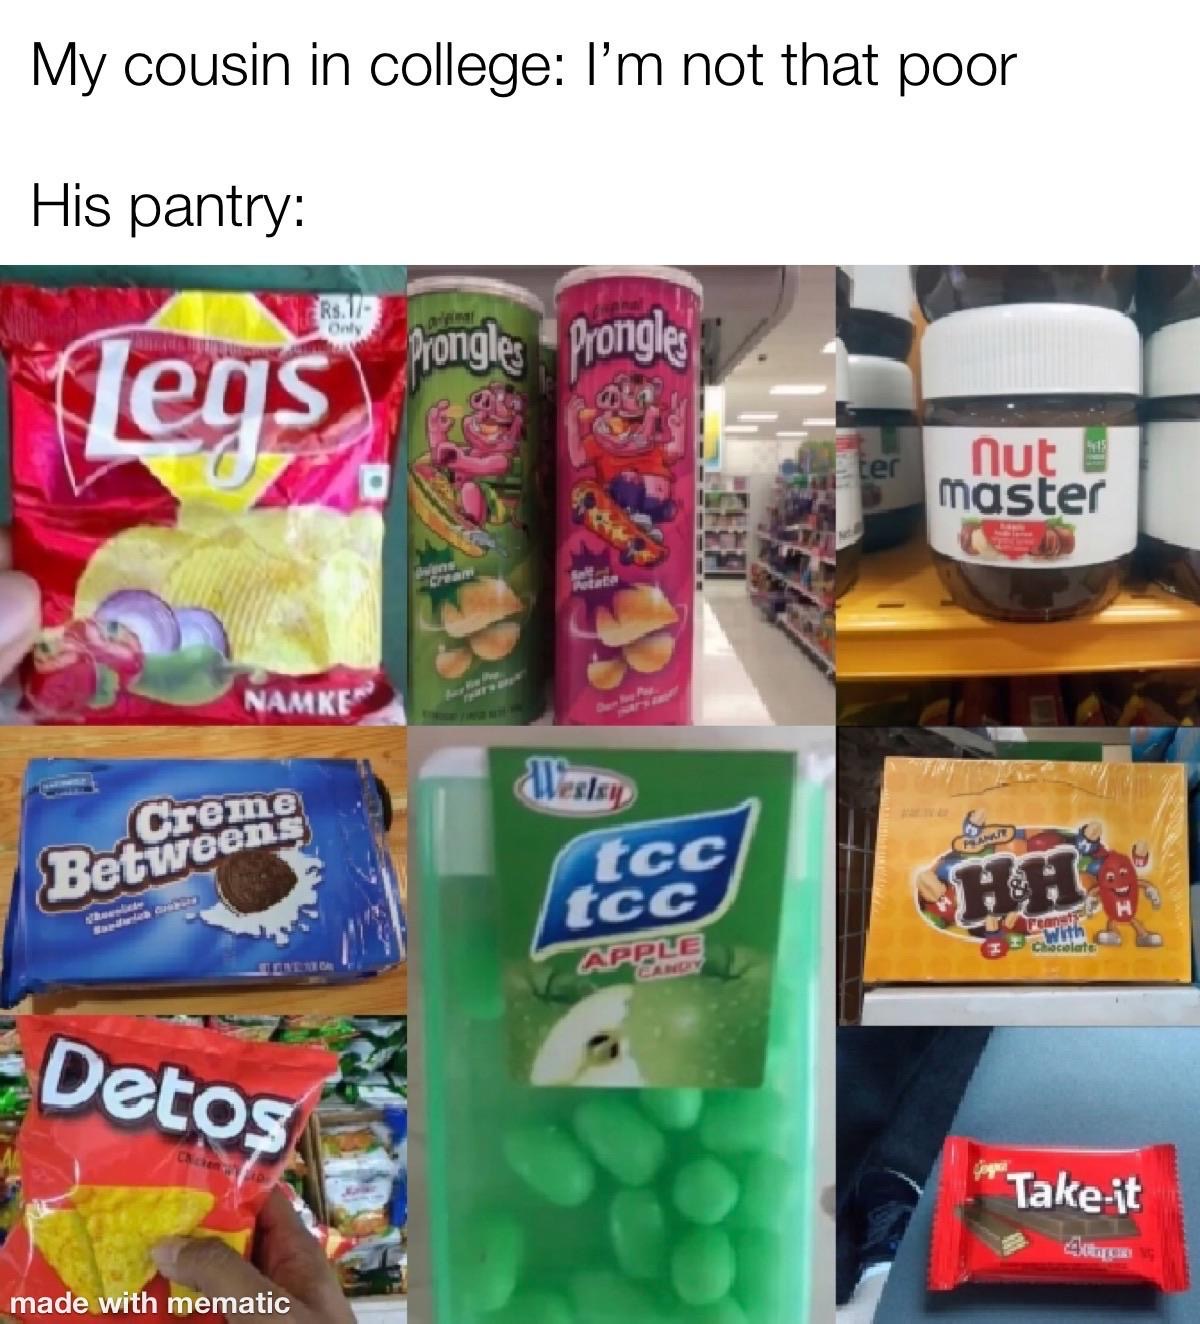 generic oreos - My cousin in college I'm not that poor His pantry Rs. 1A congle Pongle Legs ter nute master Namke Creme Betweens tcc tcc Hh Feast With Chocolate Apple Detos Chce Takeit made with mematic